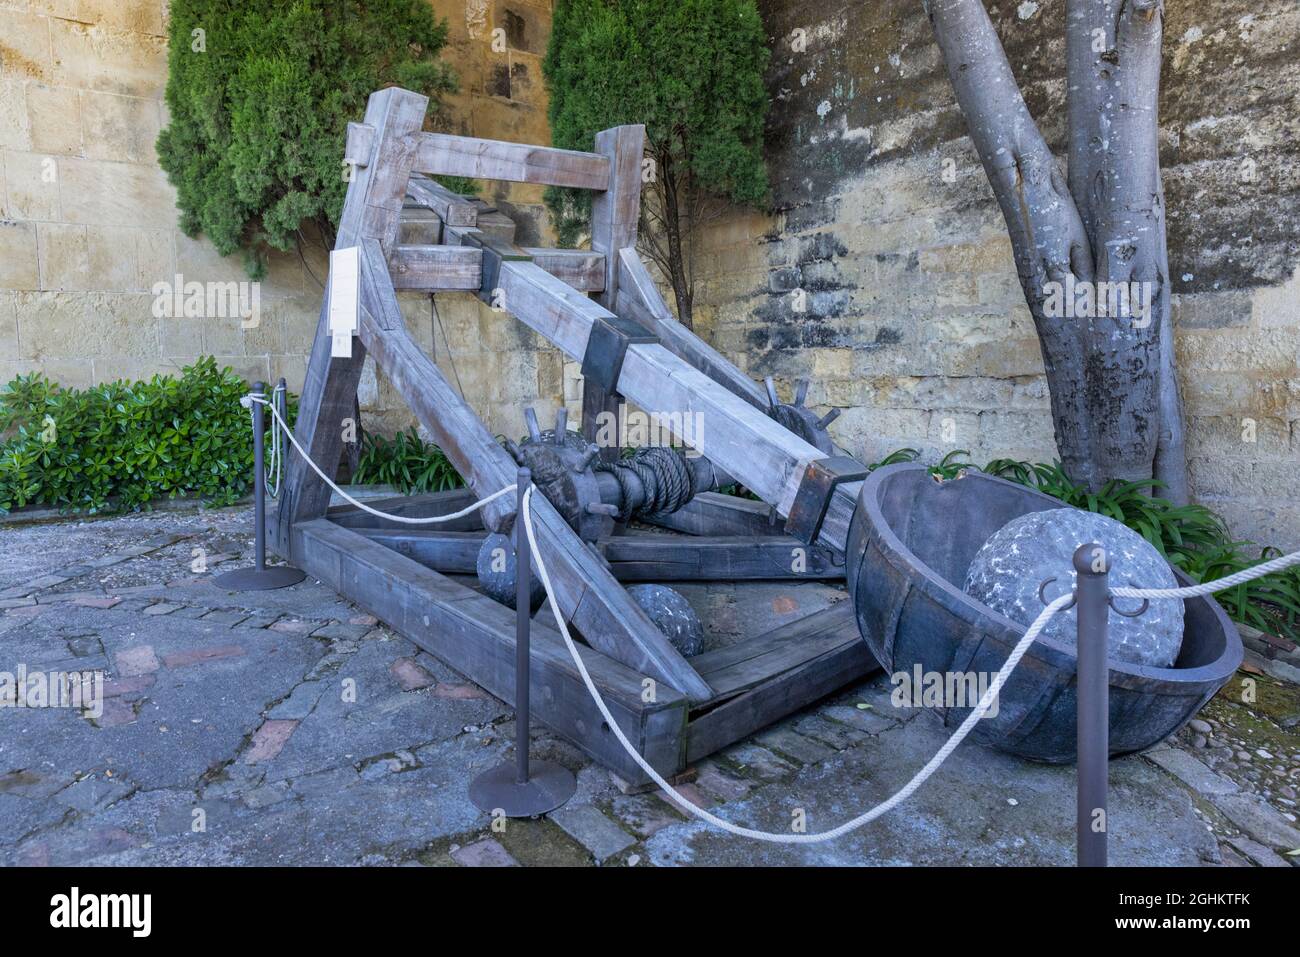 Recreation of a catapult.  Weapons similar to this were used from ancient through medieval times, often as siege weapons against cities and castles. Stock Photo